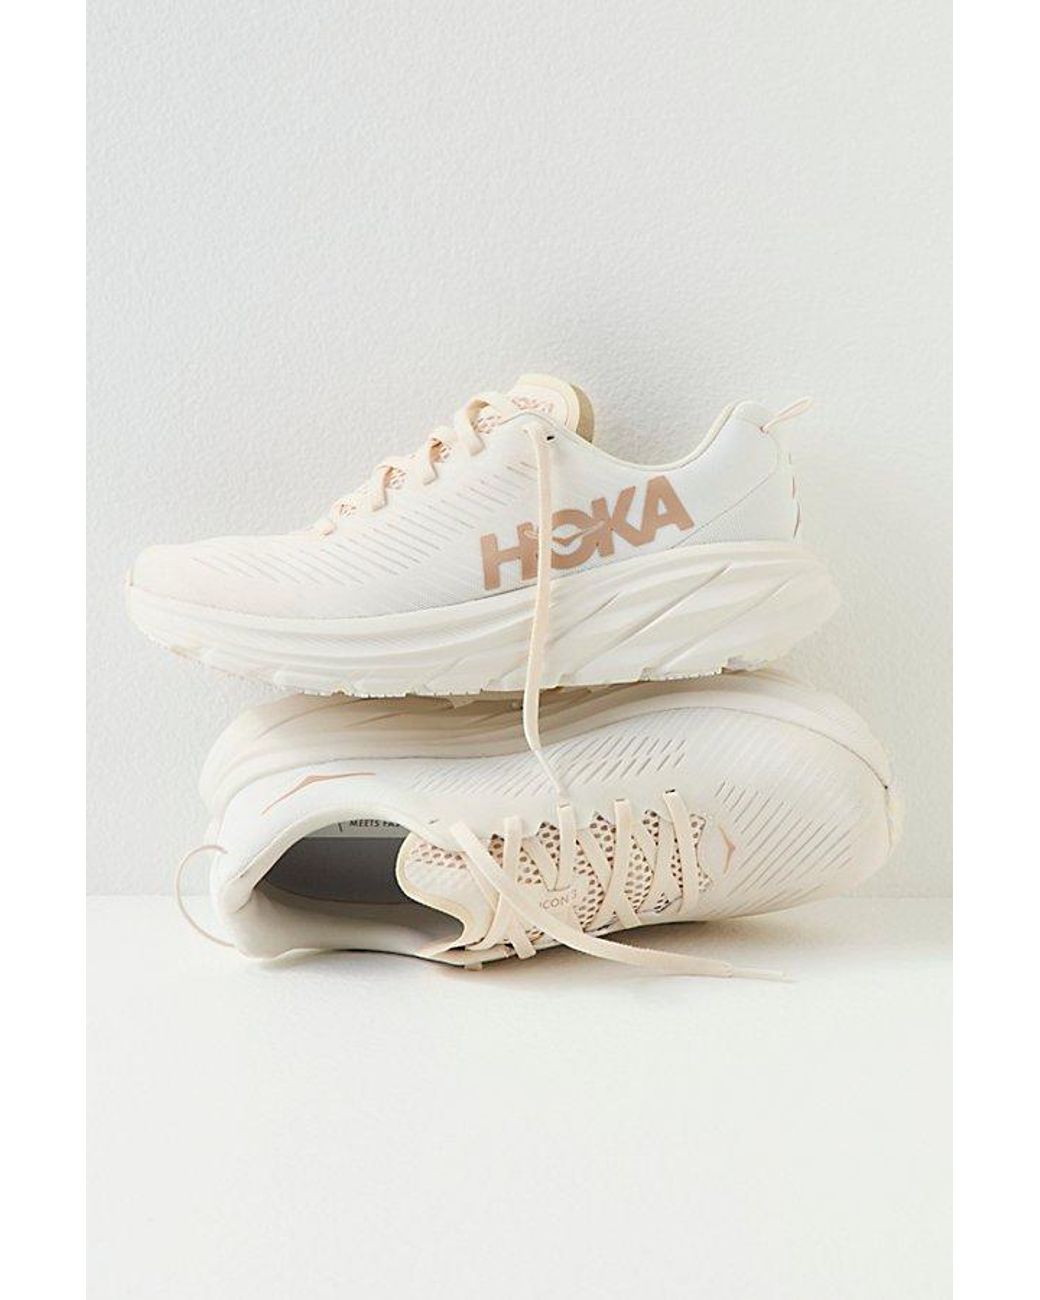 Free People Hoka Rincon 3 Sneakers in Natural | Lyst